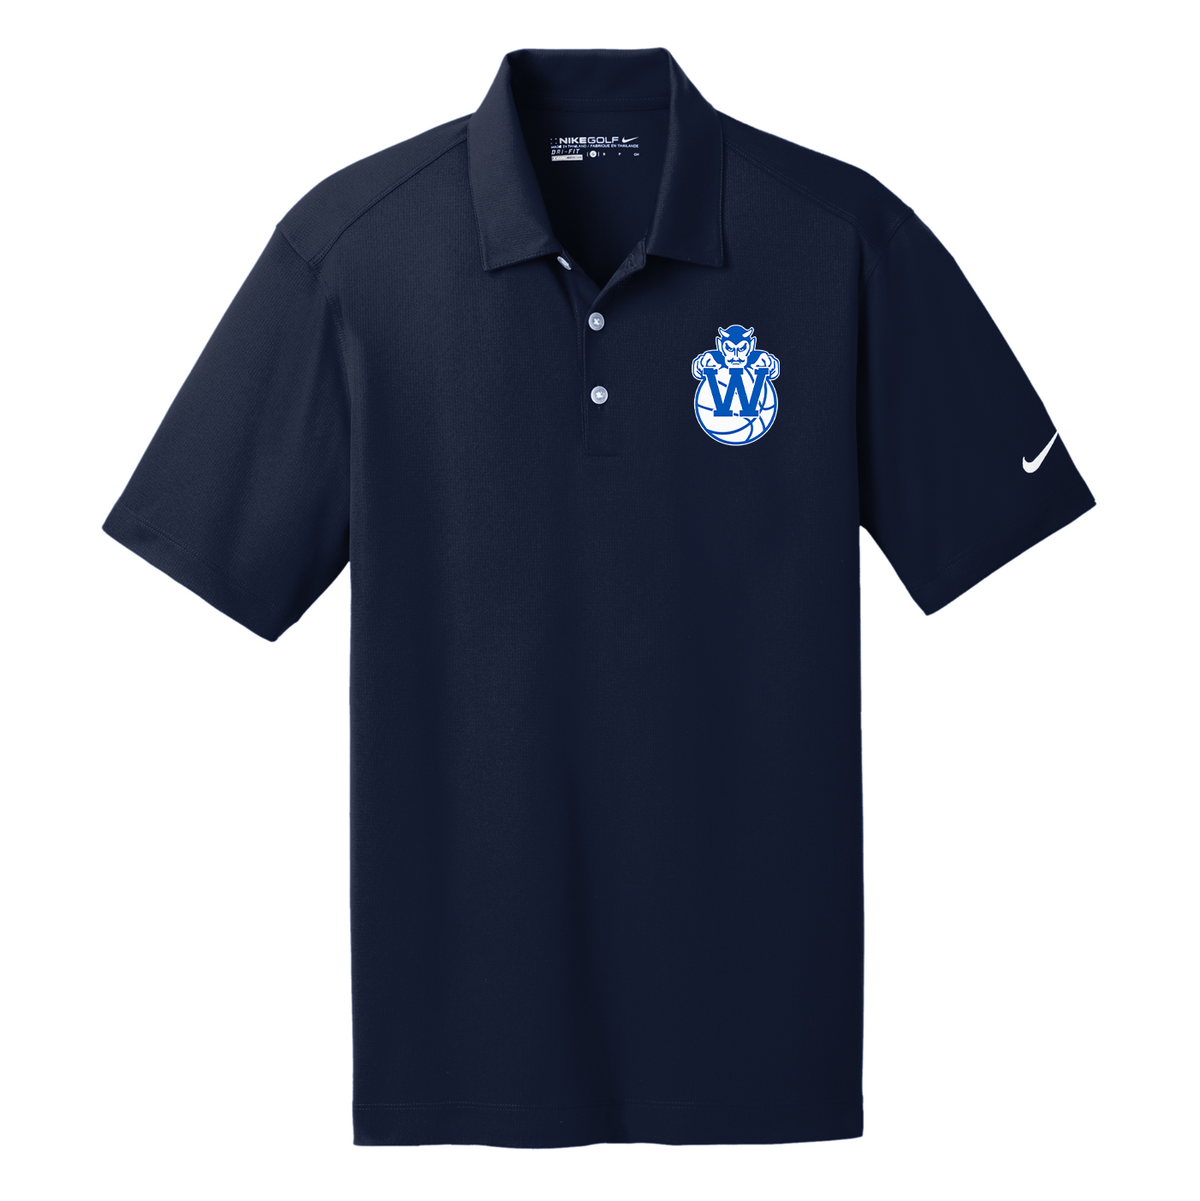 Westfield HS Basketball Vertical Mesh Polo